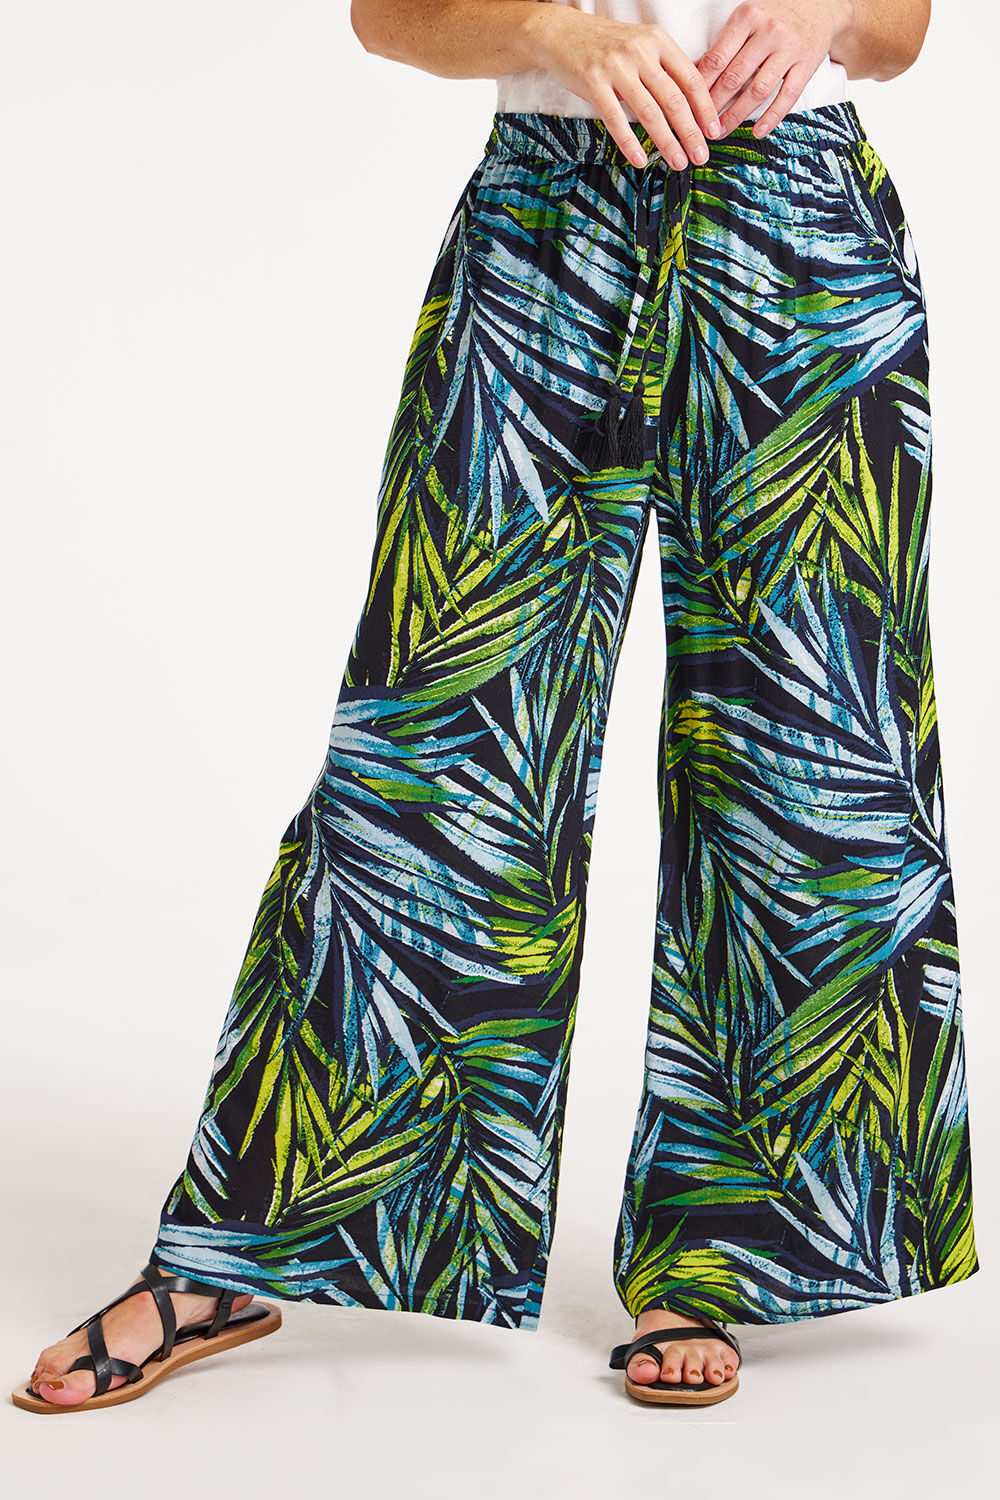 Print Holiday striped sequinned wide-leg trousers | La DoubleJ | MATCHES UK